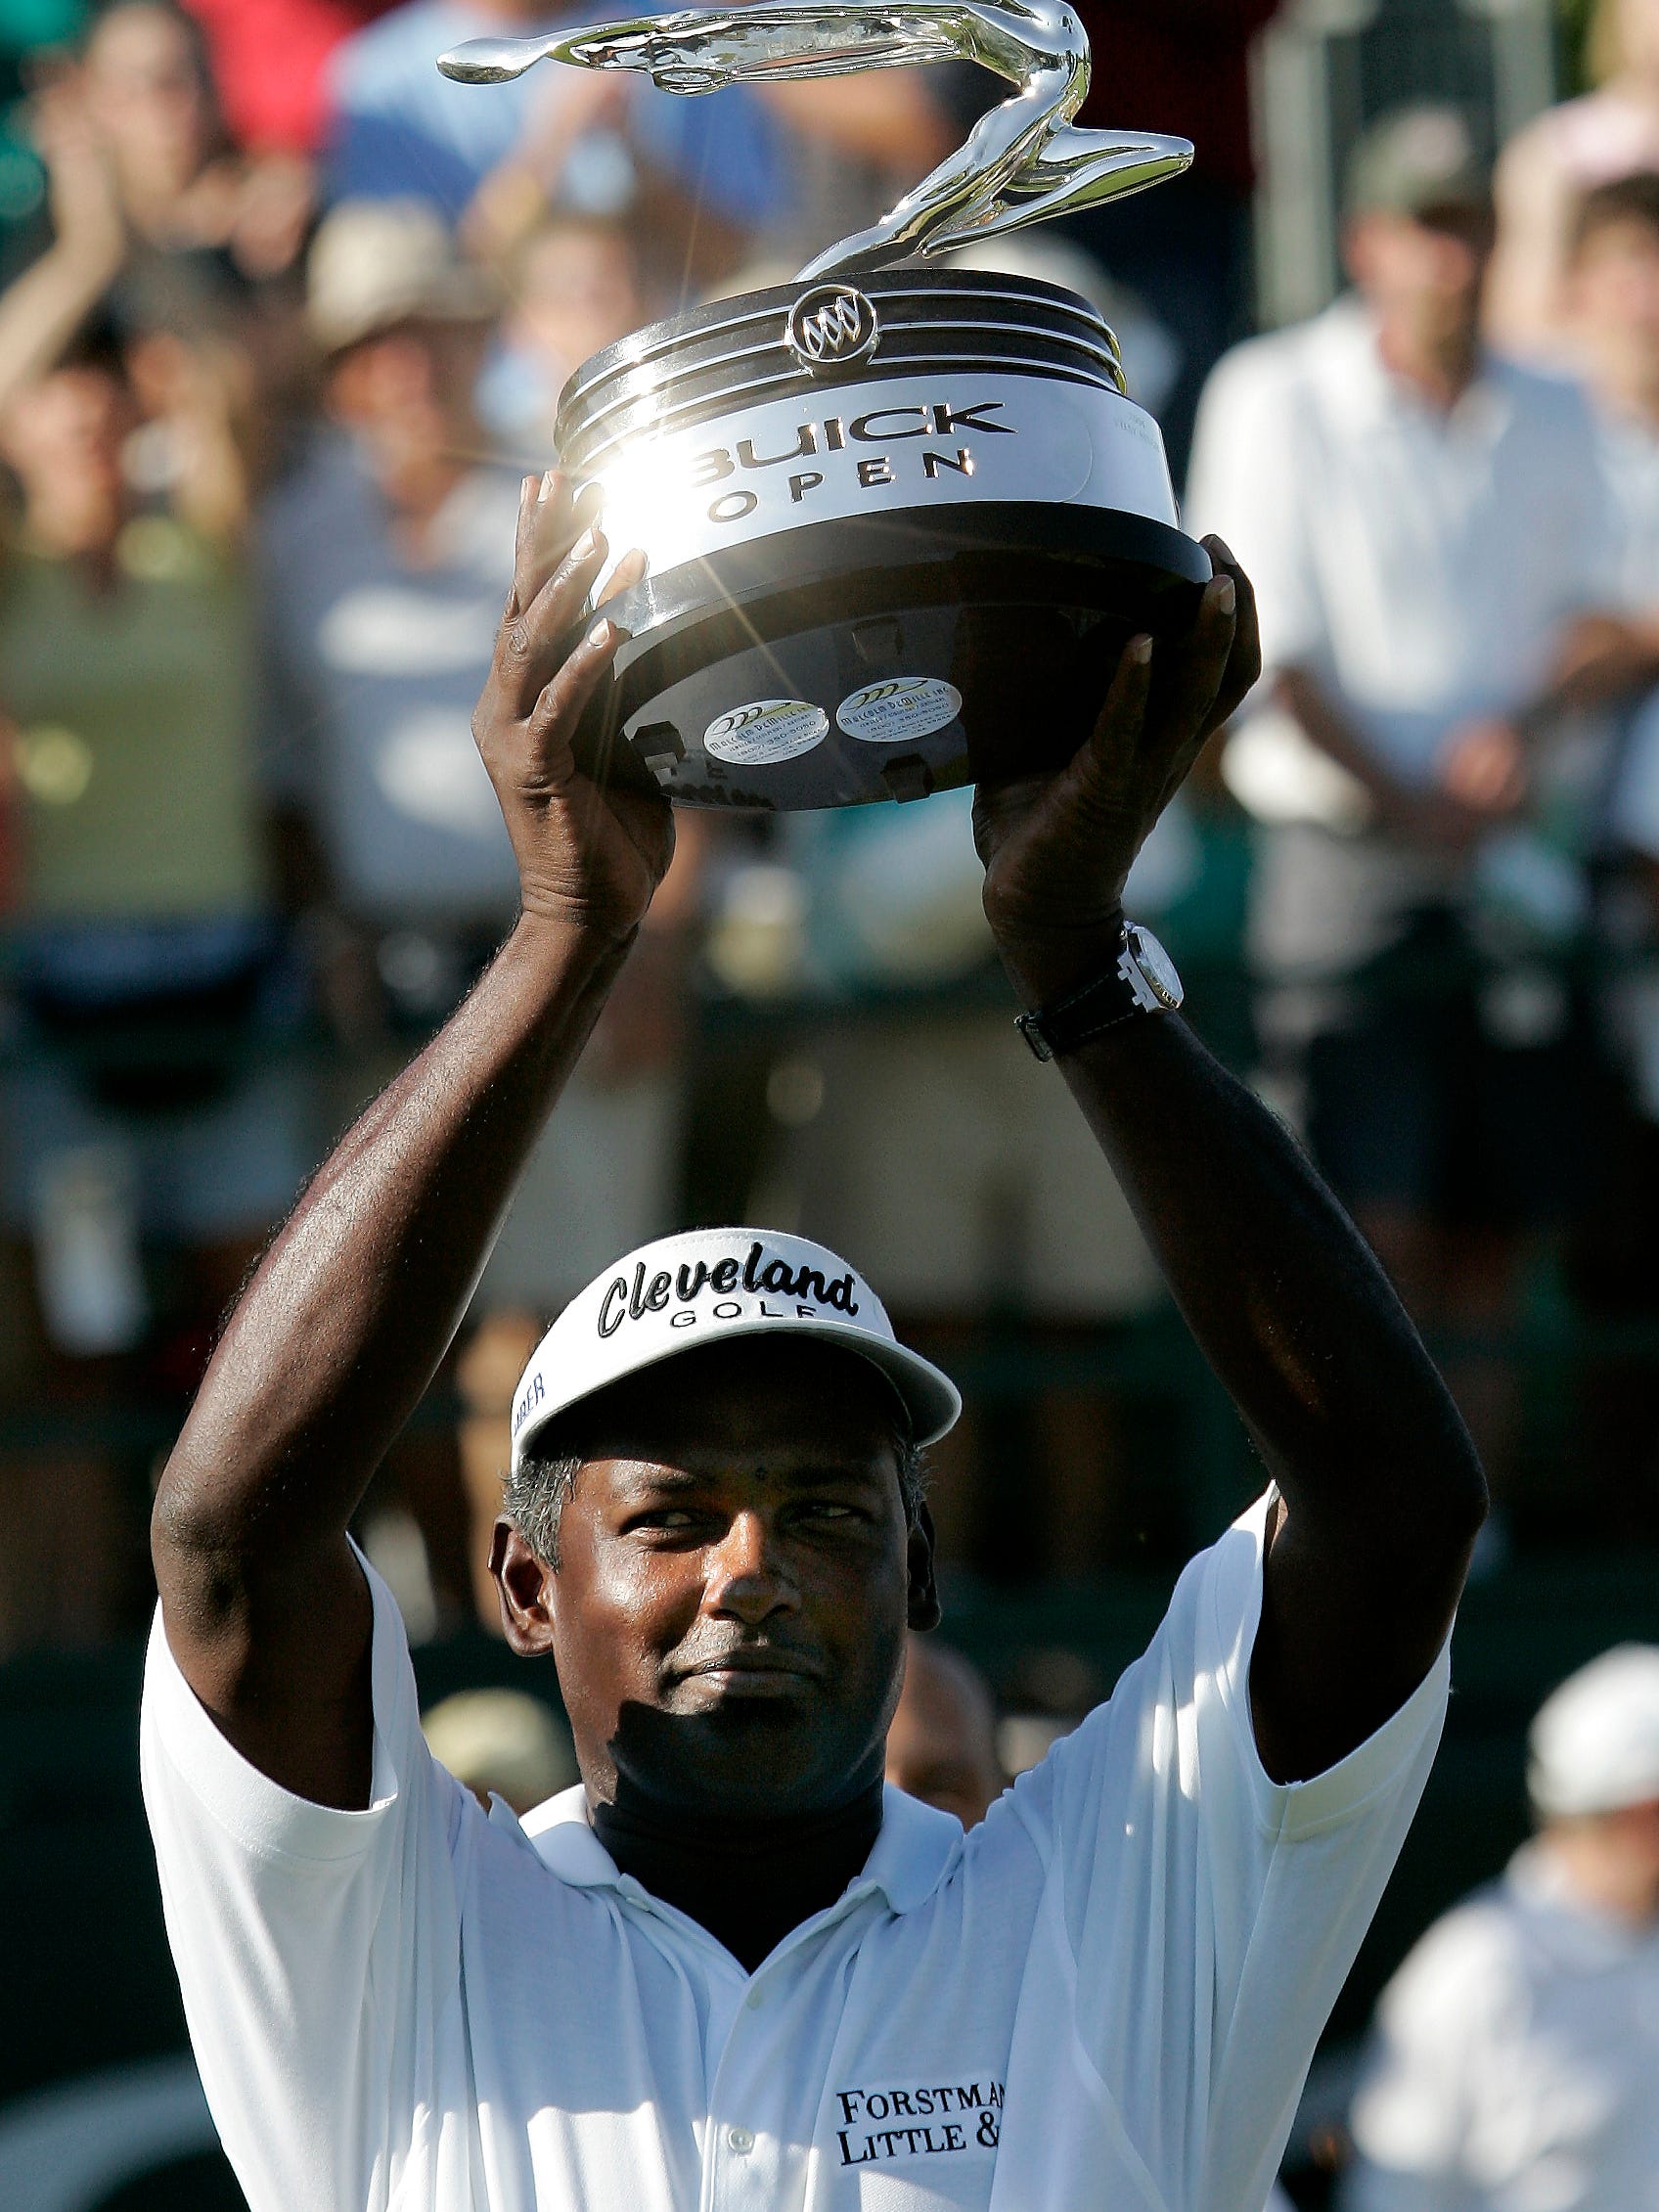 Vijay Singh wins the Buick Open in 2005. He won the tournament three times.